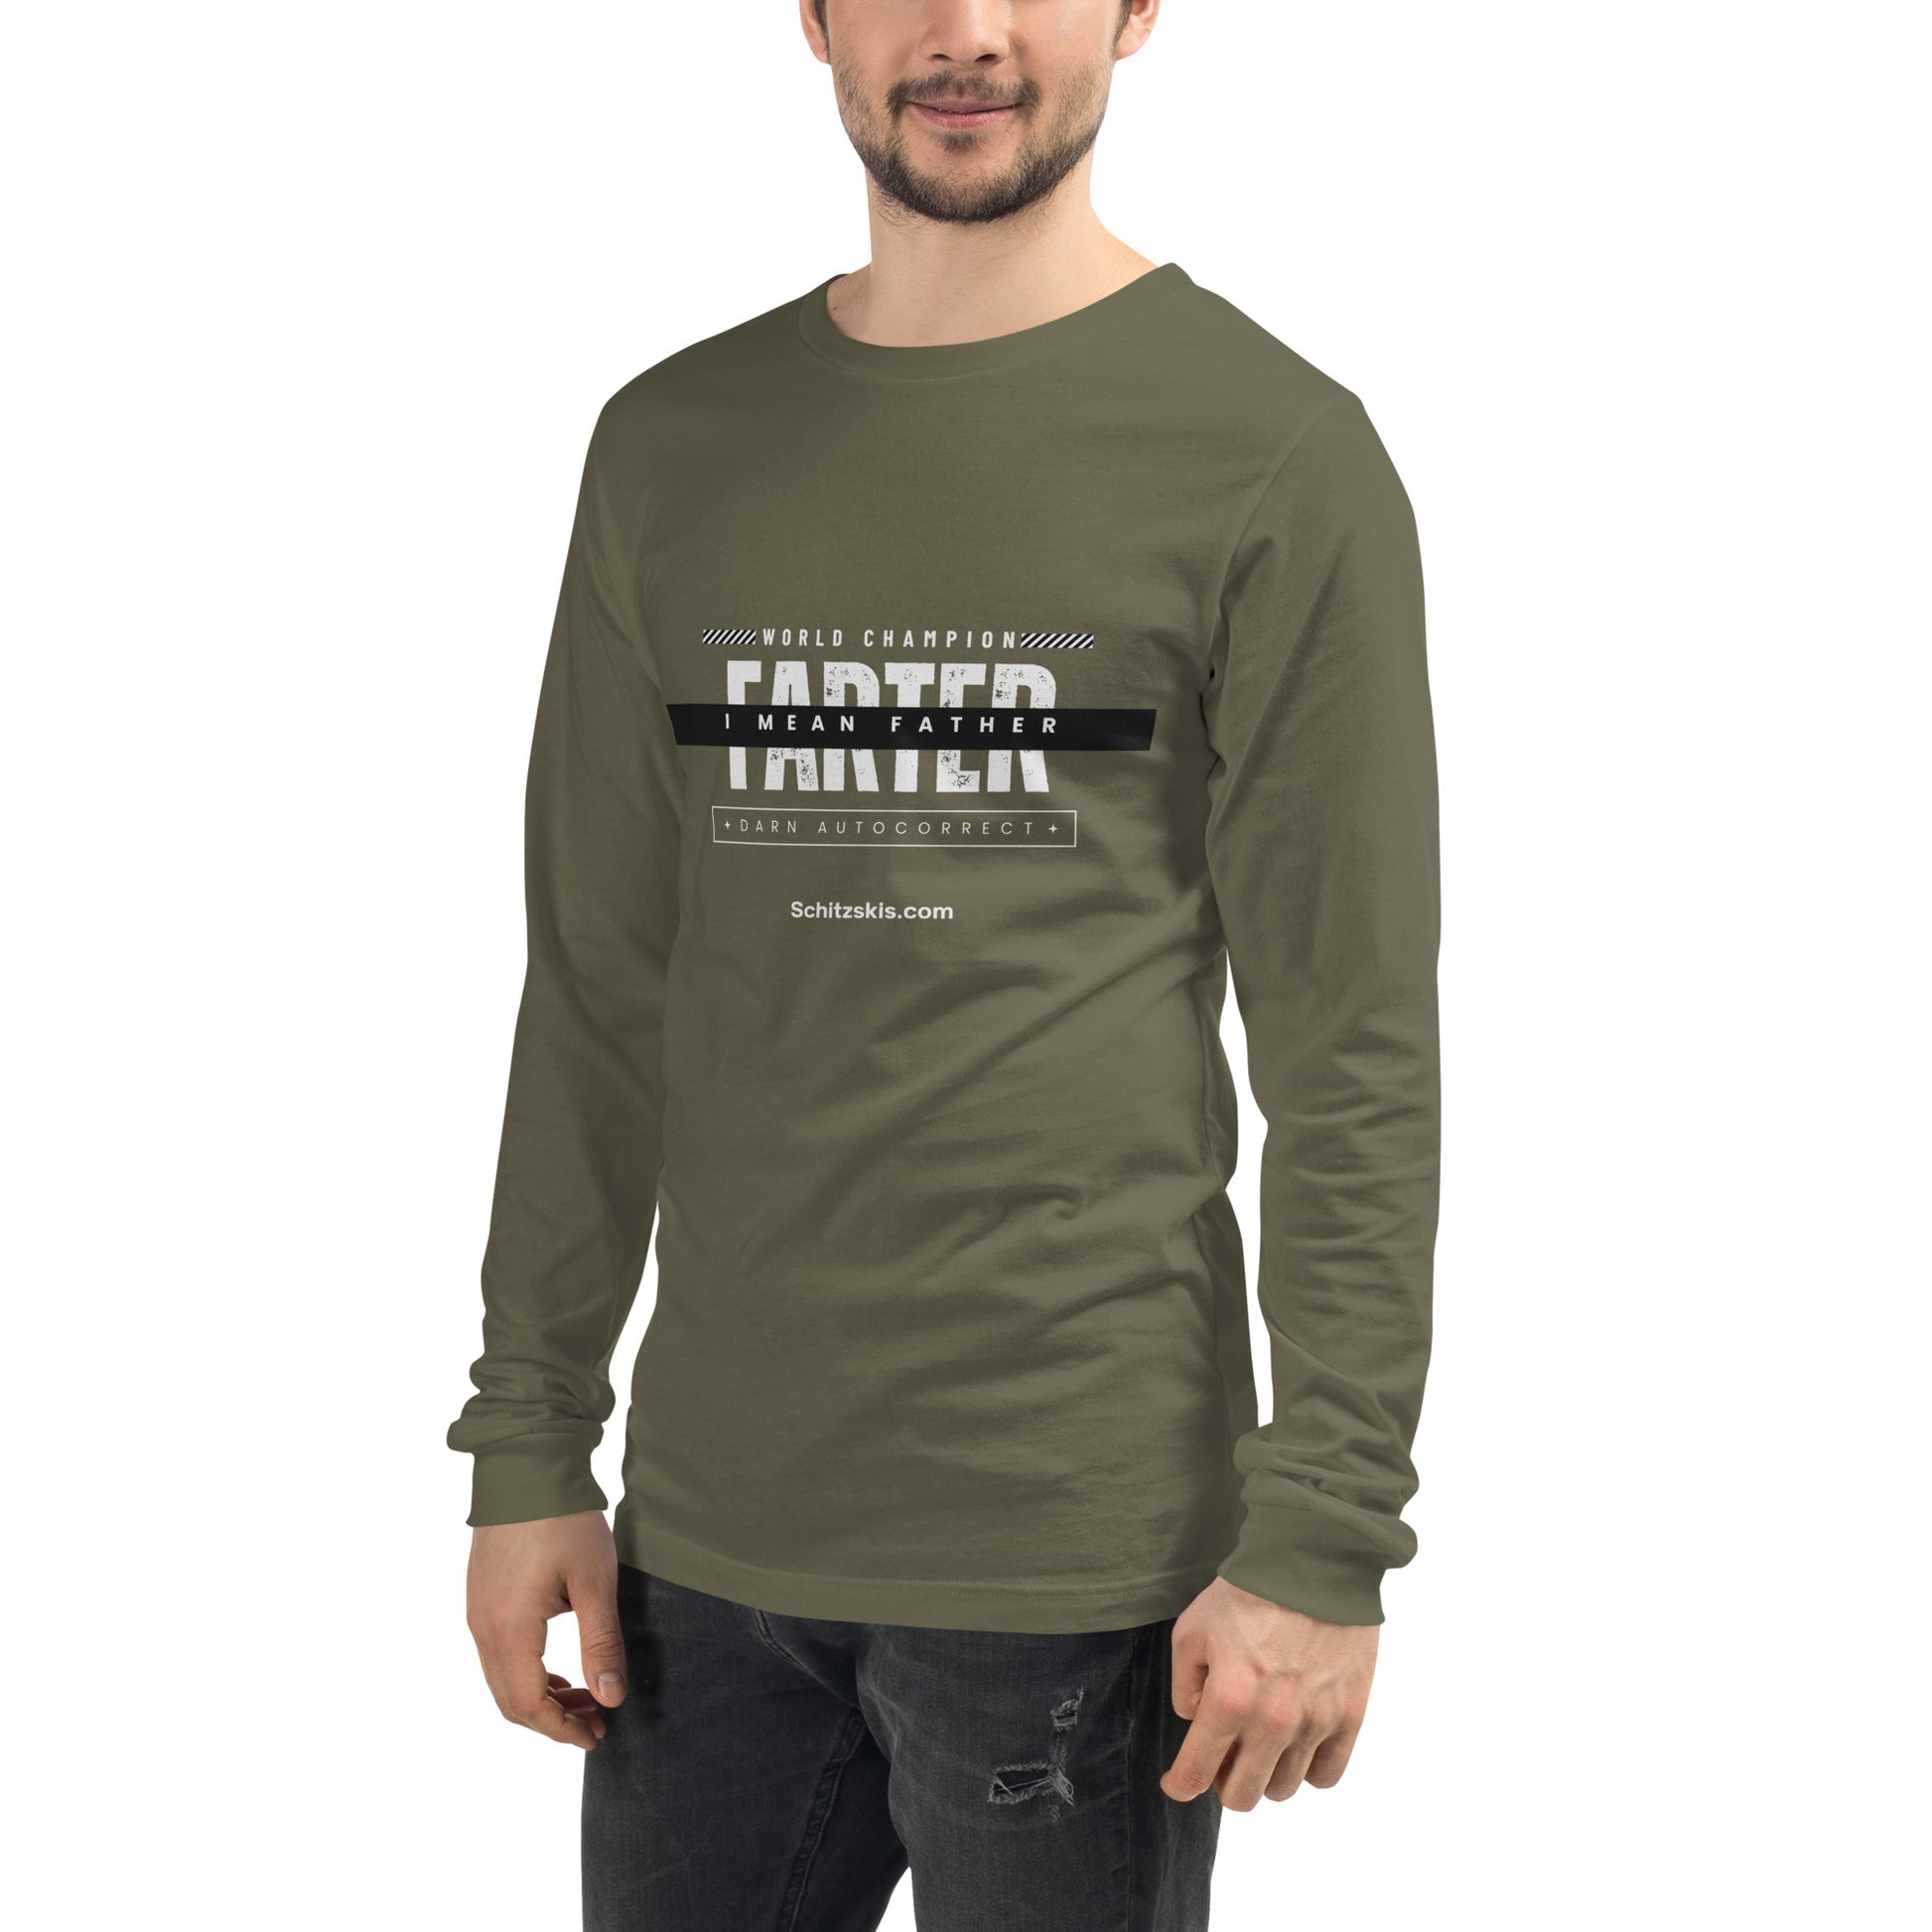 World Champion Long Sleeve Tee in Army green color 3/4 view on male model